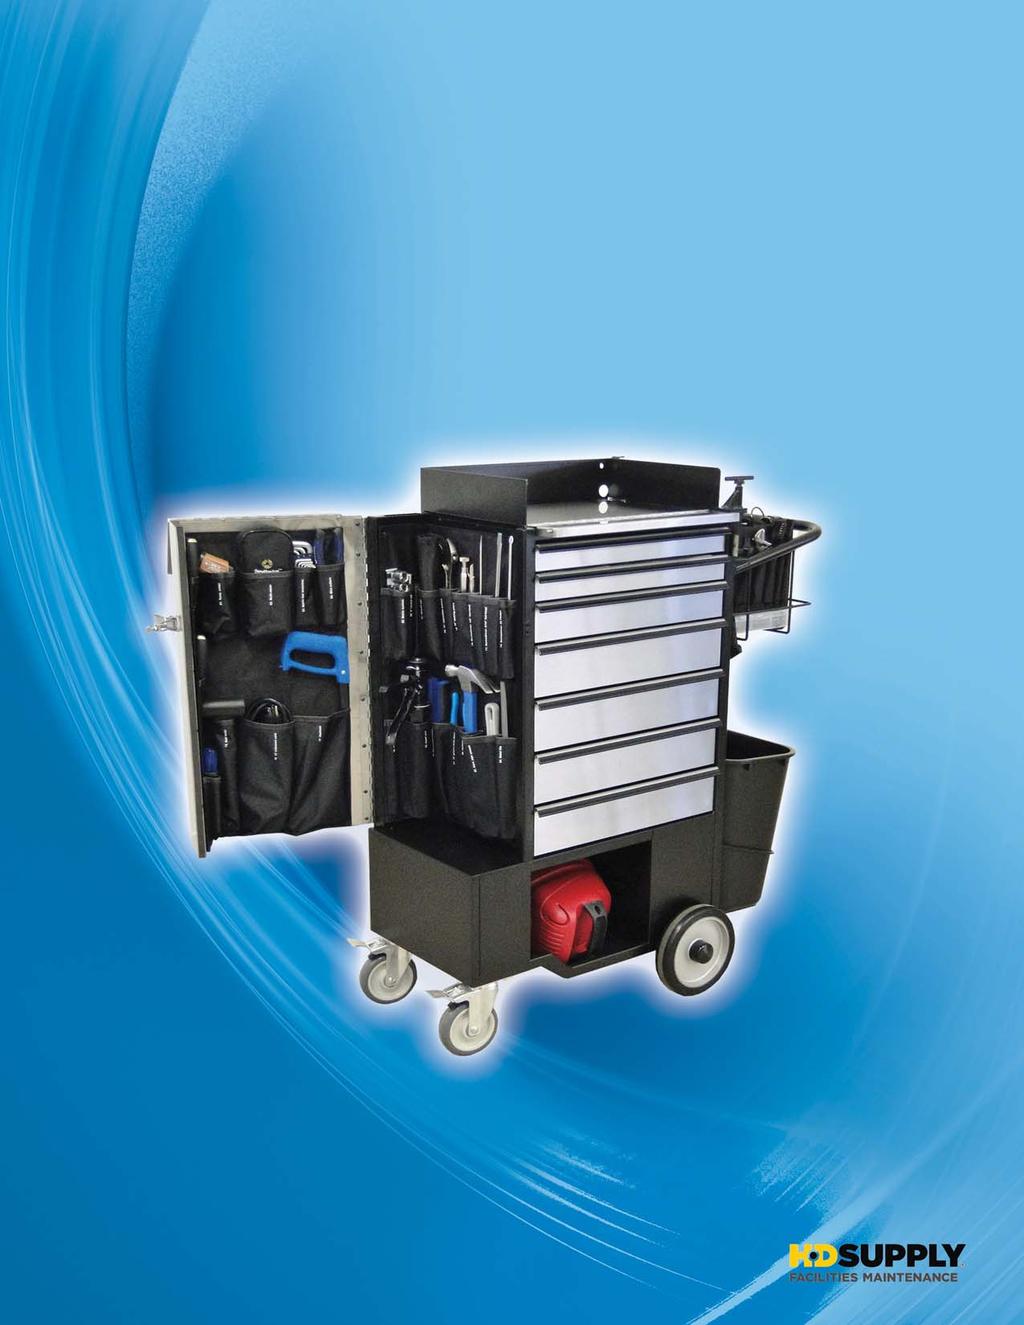 Cart Features Light Weight Narrow Width: 14 Wide Easy to Maneuver ON THE RIGHT SIDE (NOT SHOWN) 3 Large Utility Pockets Holds spray bottles, rags, knee pads and other Fluorescent Light Tube Storage